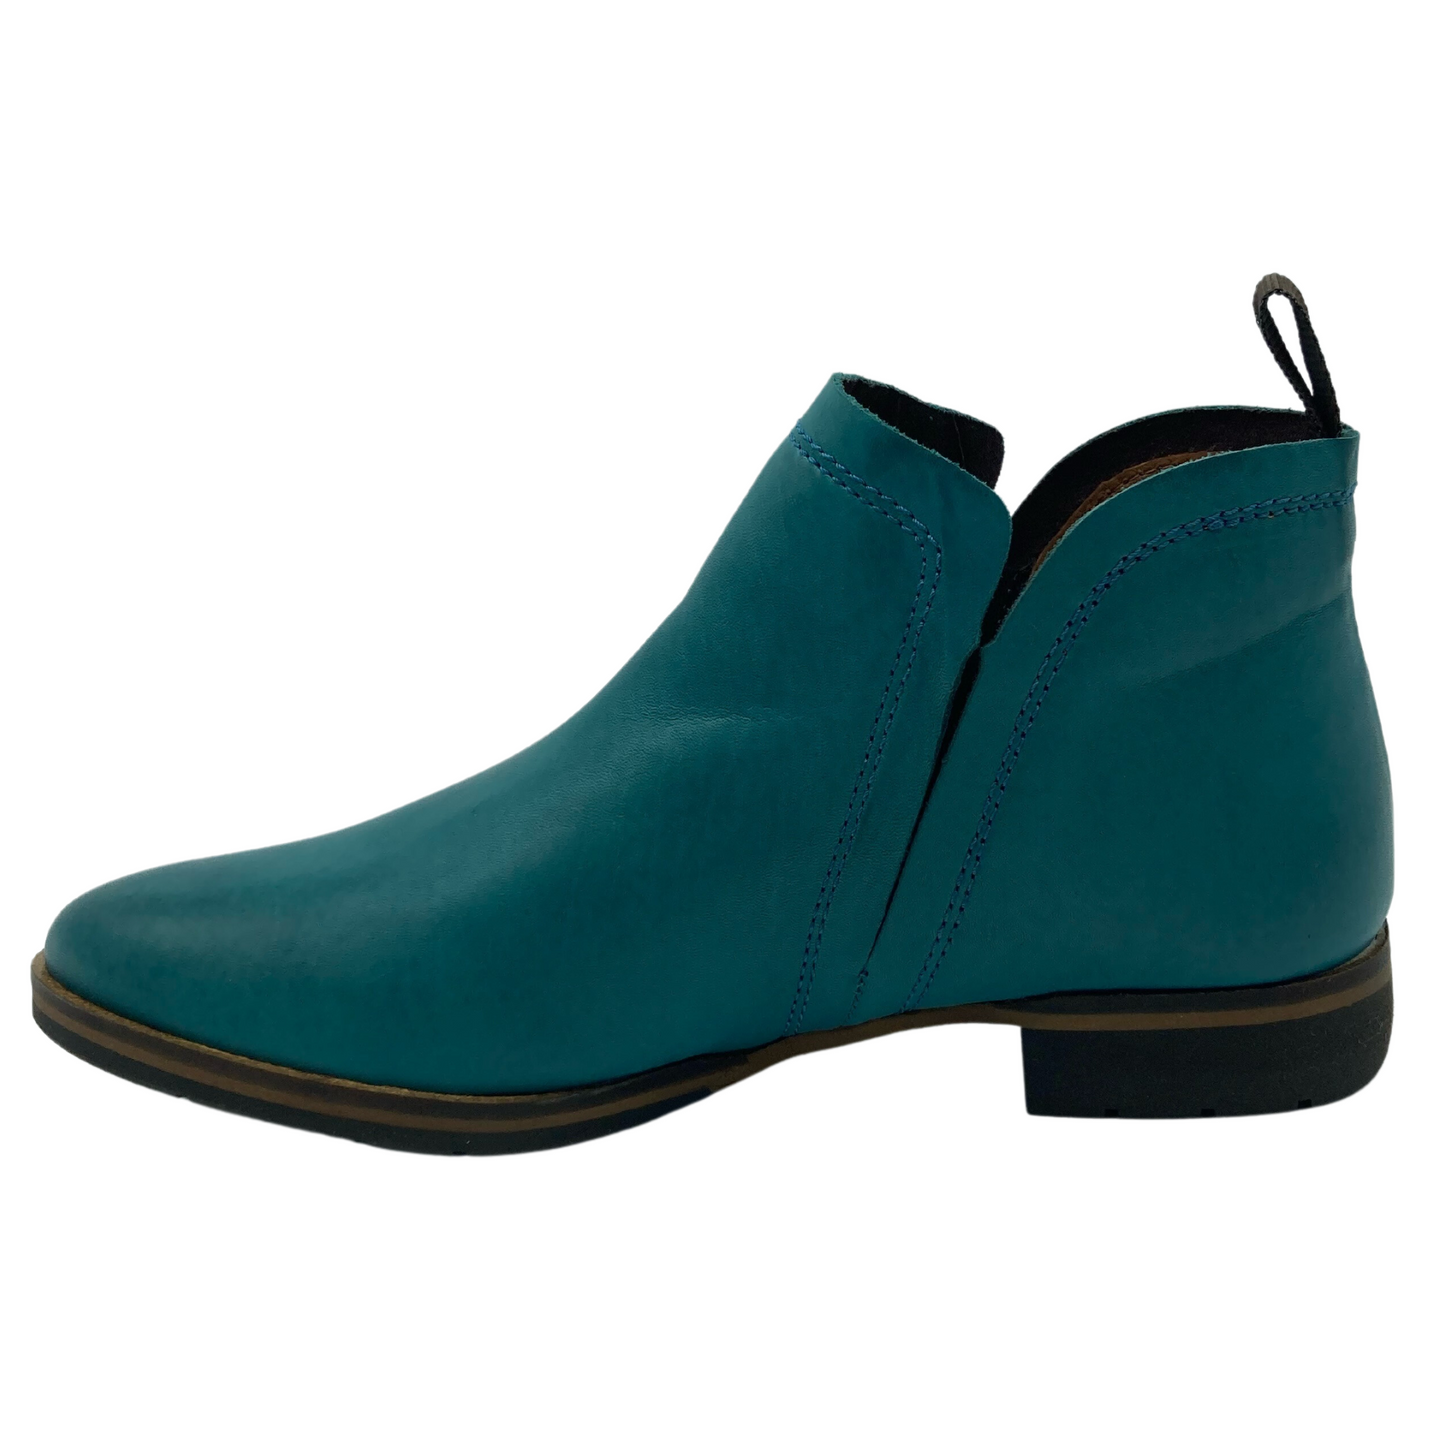 Left facing view of blue leather ankle boot with block heel, elastic gusset and rounded toe